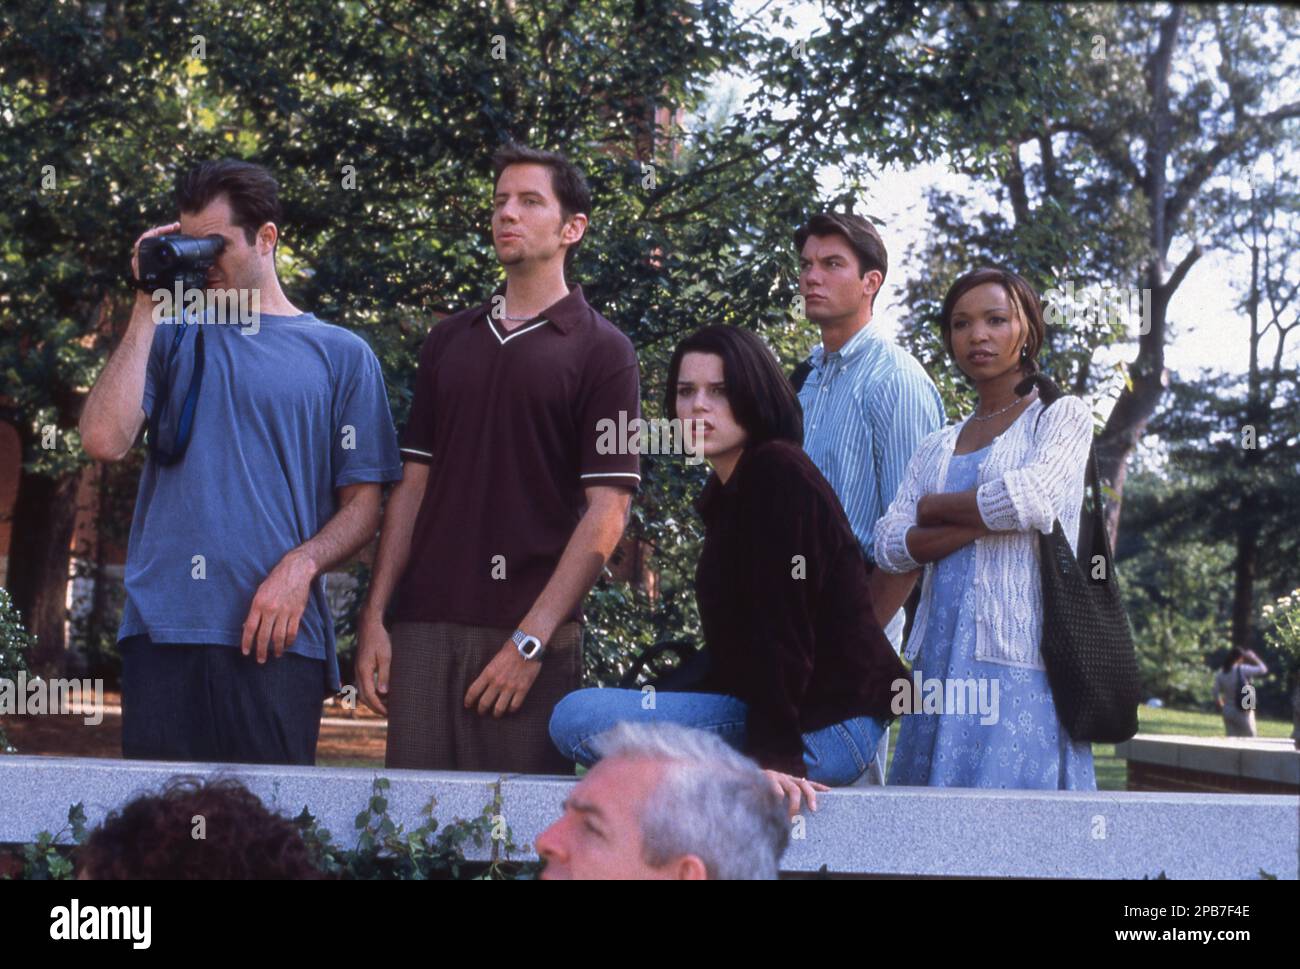 TIMOTHY OLYPHANT JAMIE KENNEDY NEVE CAMPBELL JERRY O'CONNELL and ELISE NEAL in SCREAM 2 (1997) director WES CRAVEN writer Kevin Williamson music Marco Beltrami costume design Kathleen Detoro Dimension Films / Konrad Pictures / Craven - Maddalena Films / Miramax / Maven Entertainment Stock Photo